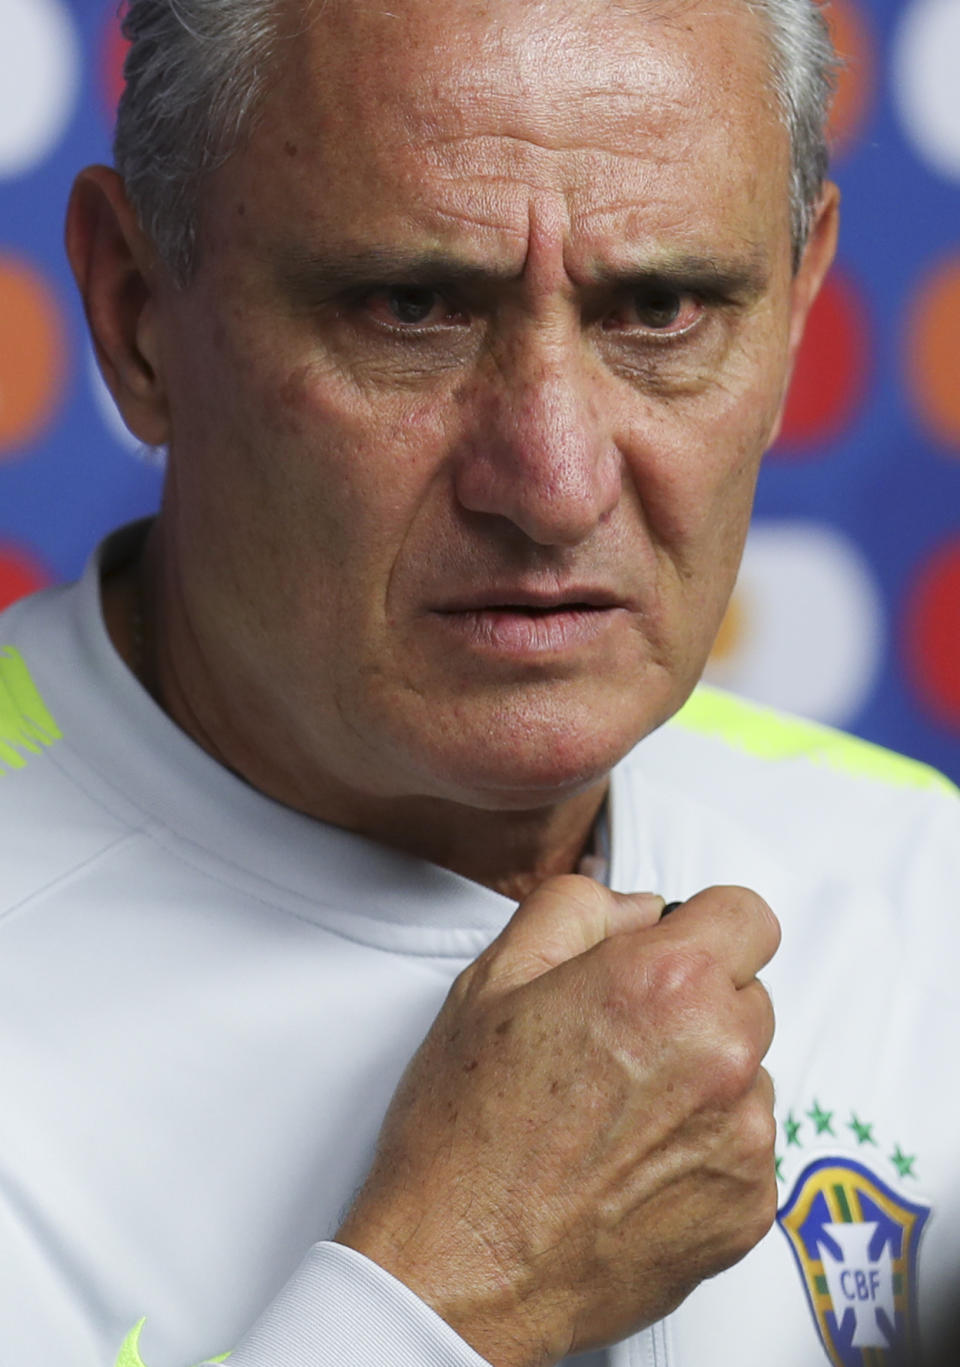 Brazil's coach Tite looks on during press conference in Belo Horizonte, Brazil, Monday, July 1, 2019. Brazil will face Argentina for a Copa America semifinal match on July, 2.(AP Photo/Natacha Pisarenko)